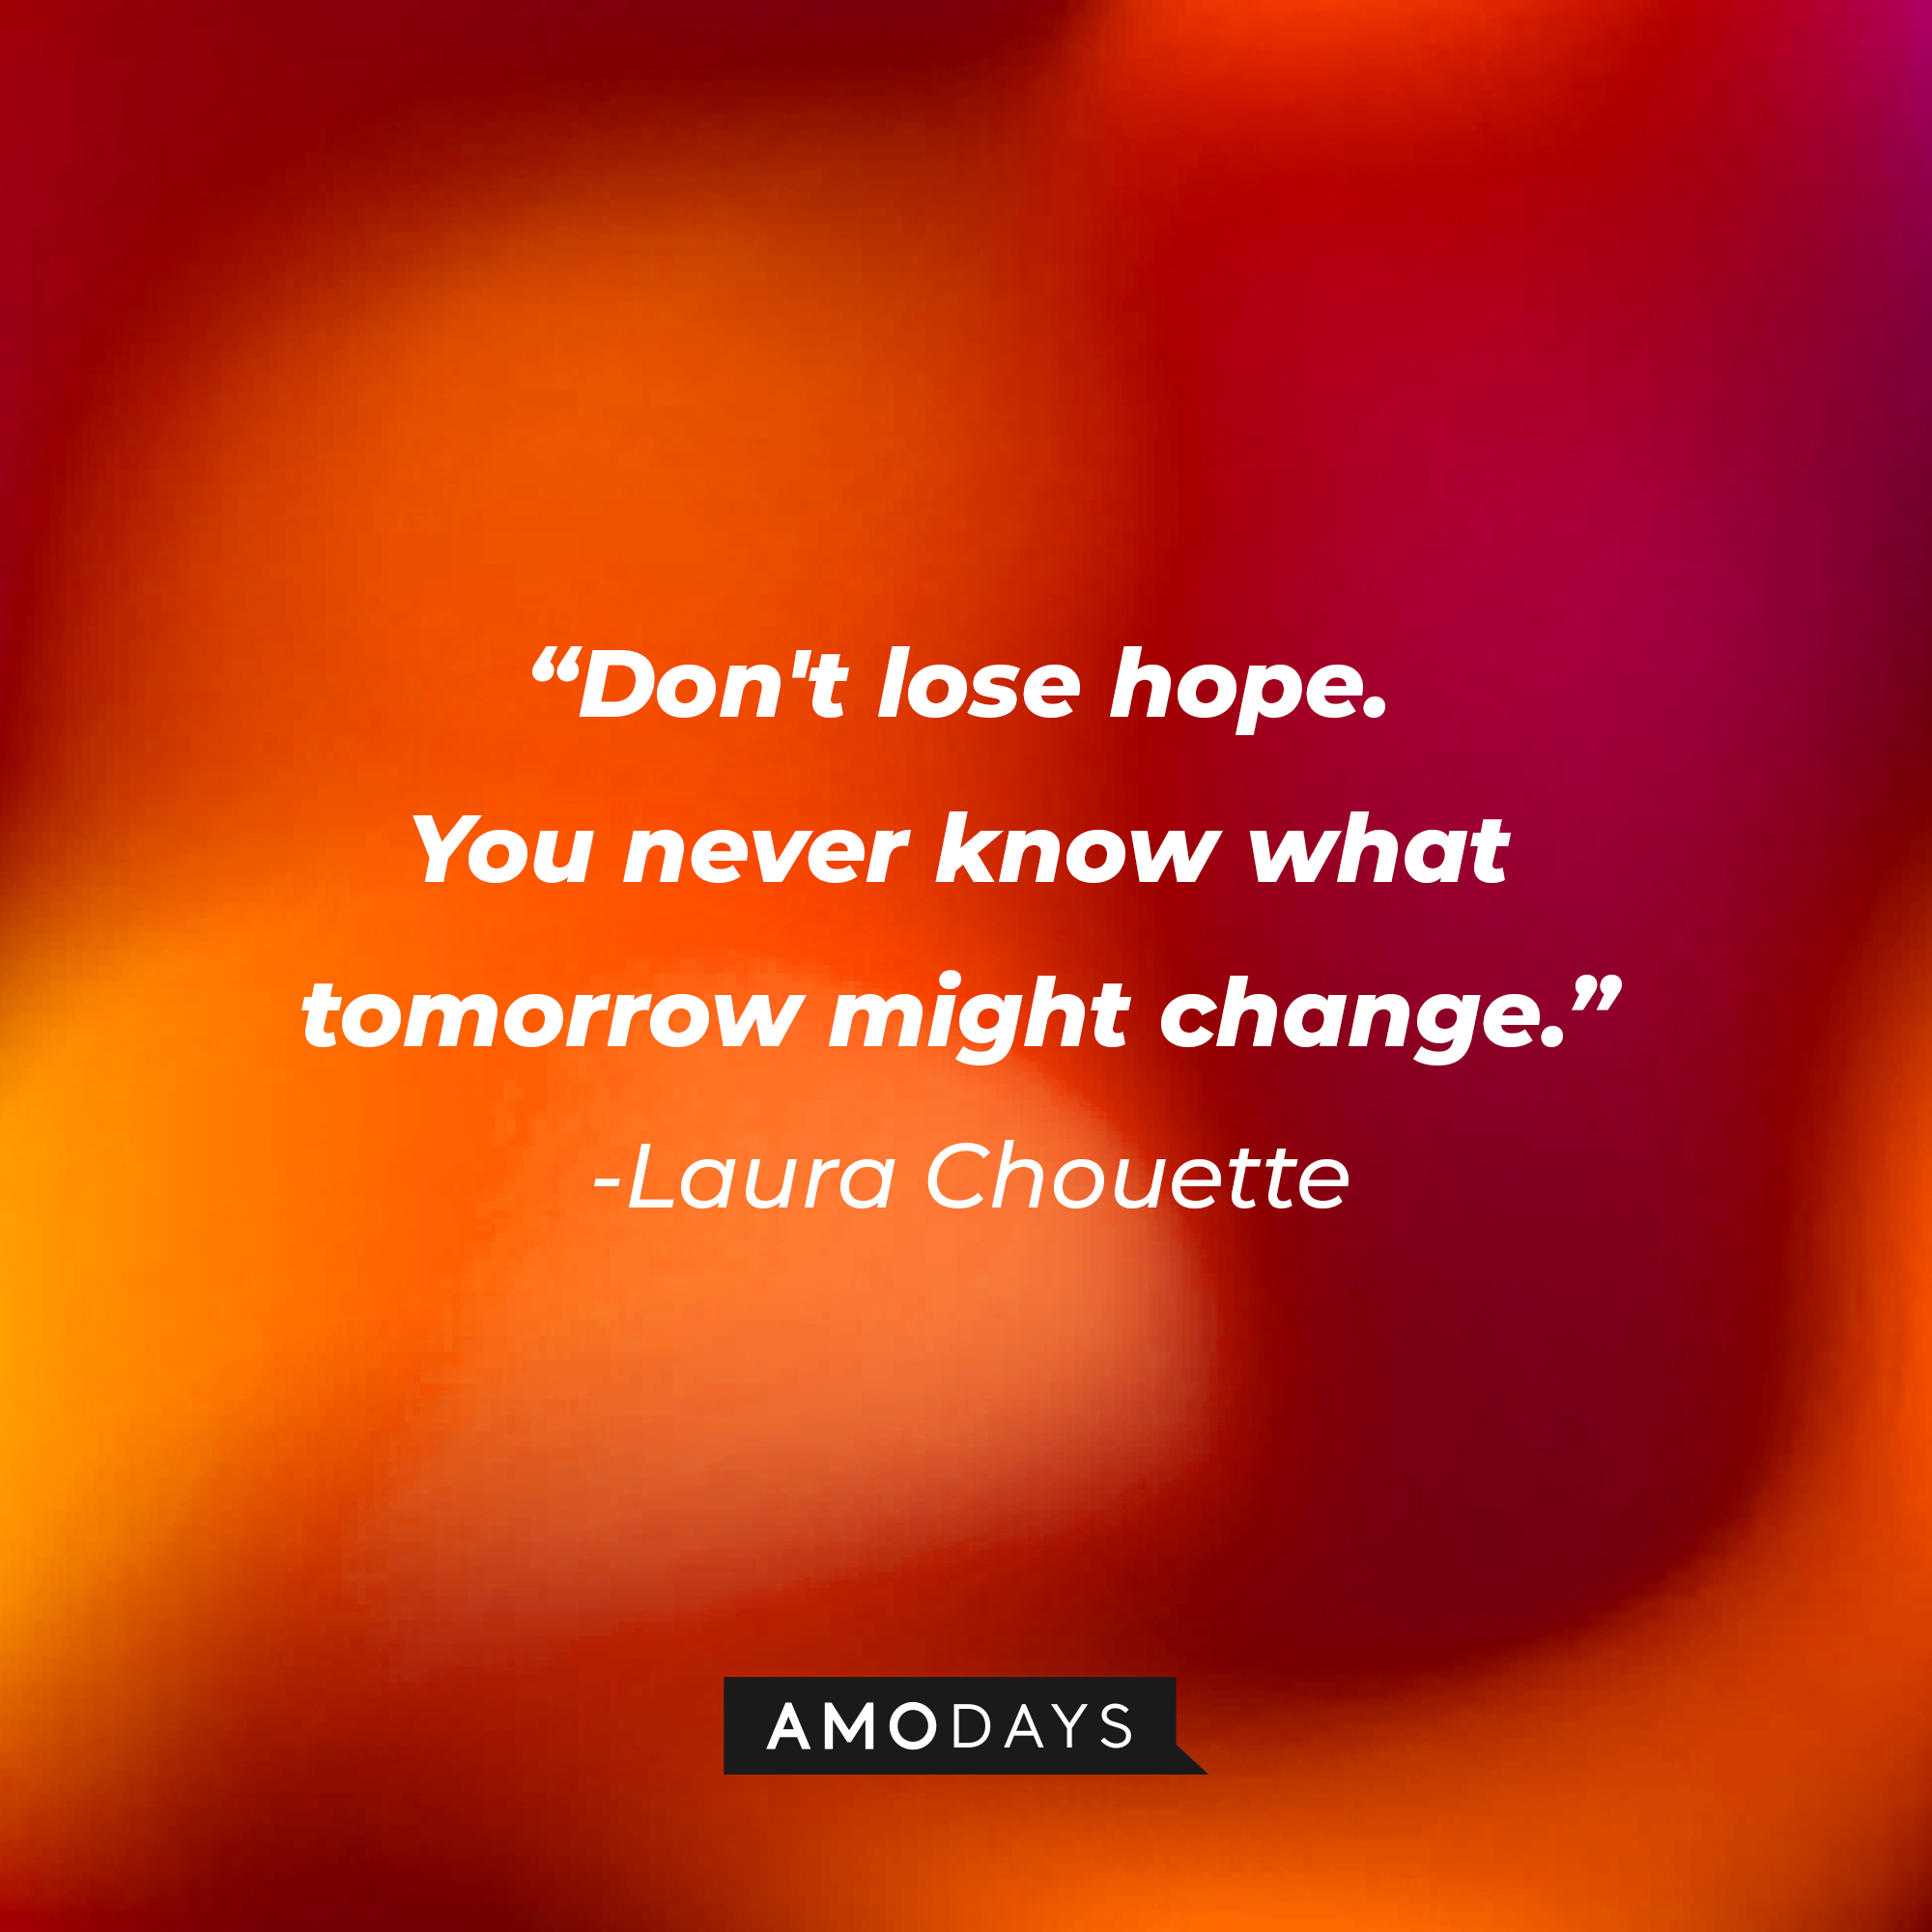 Laura Chouette’s quote: "Don't lose hope. You never know what tomorrow might change."  | Image: Amodays